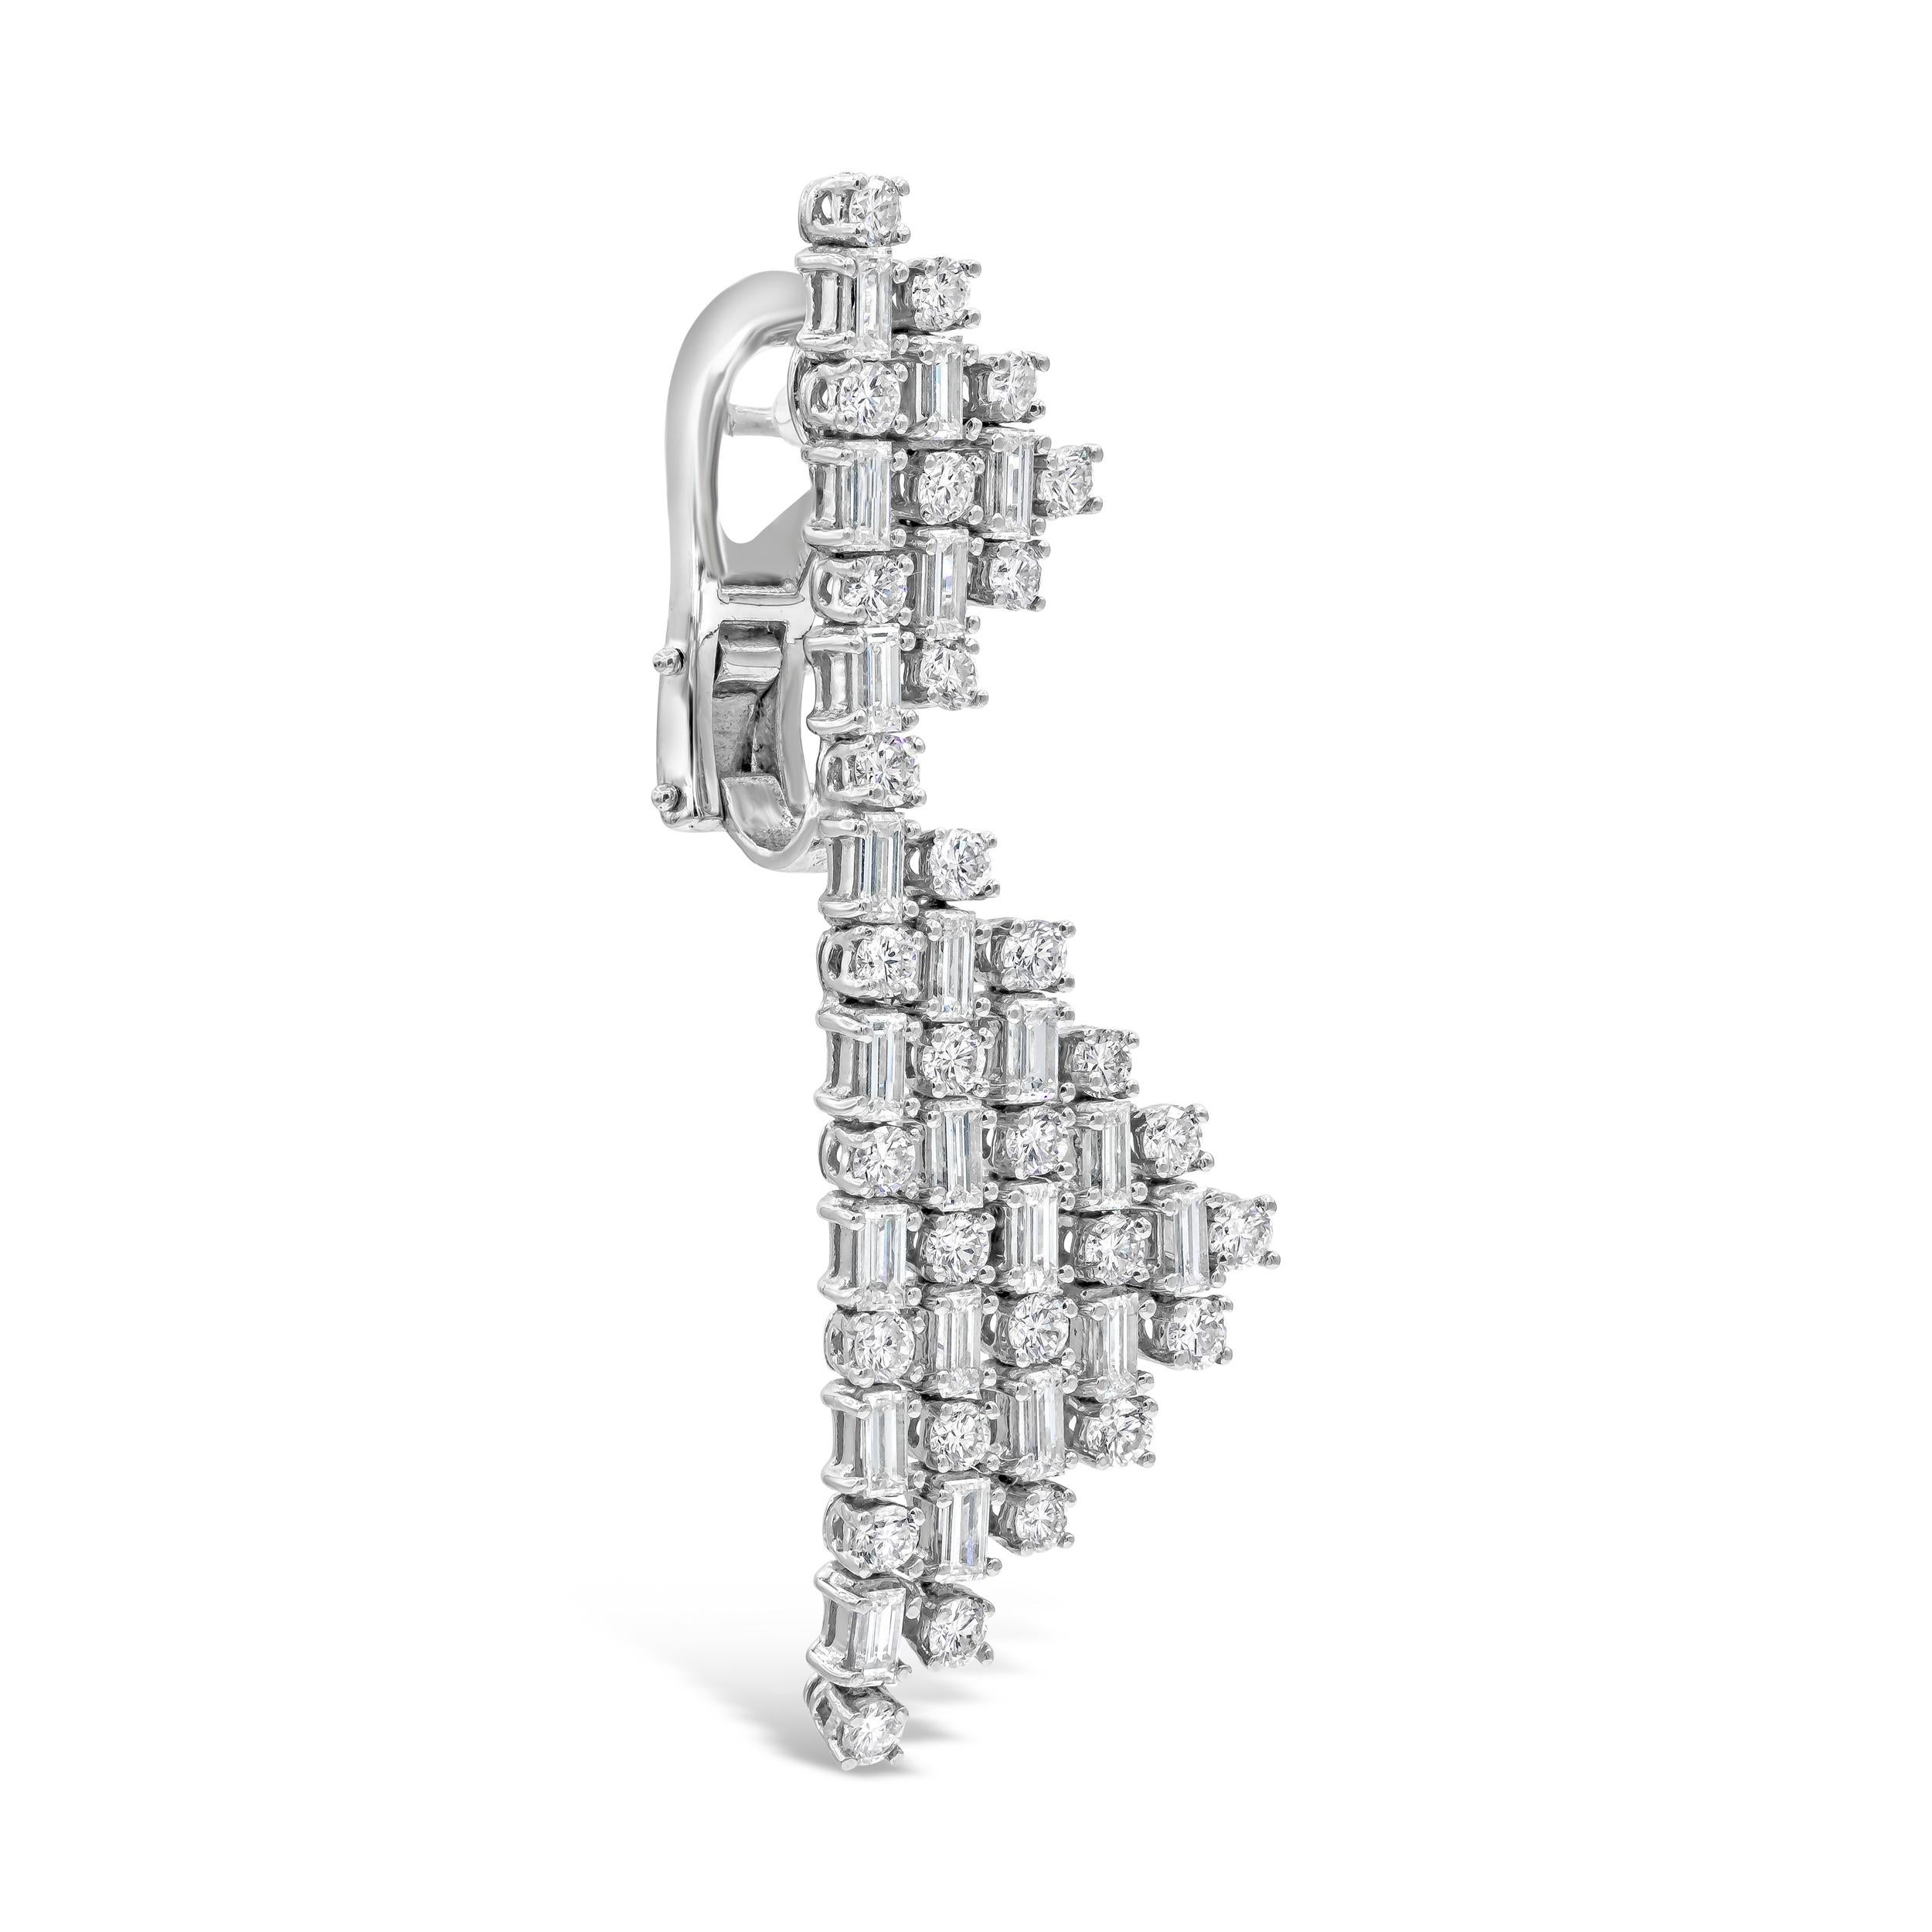 A modern and chic design featuring round diamonds alternating with baguette diamonds, set in a open-work triangular design. Diamonds weigh 7.41 carats total. Made in 18k white gold. Omega Clip with post. Has a matching necklace.

Style available in